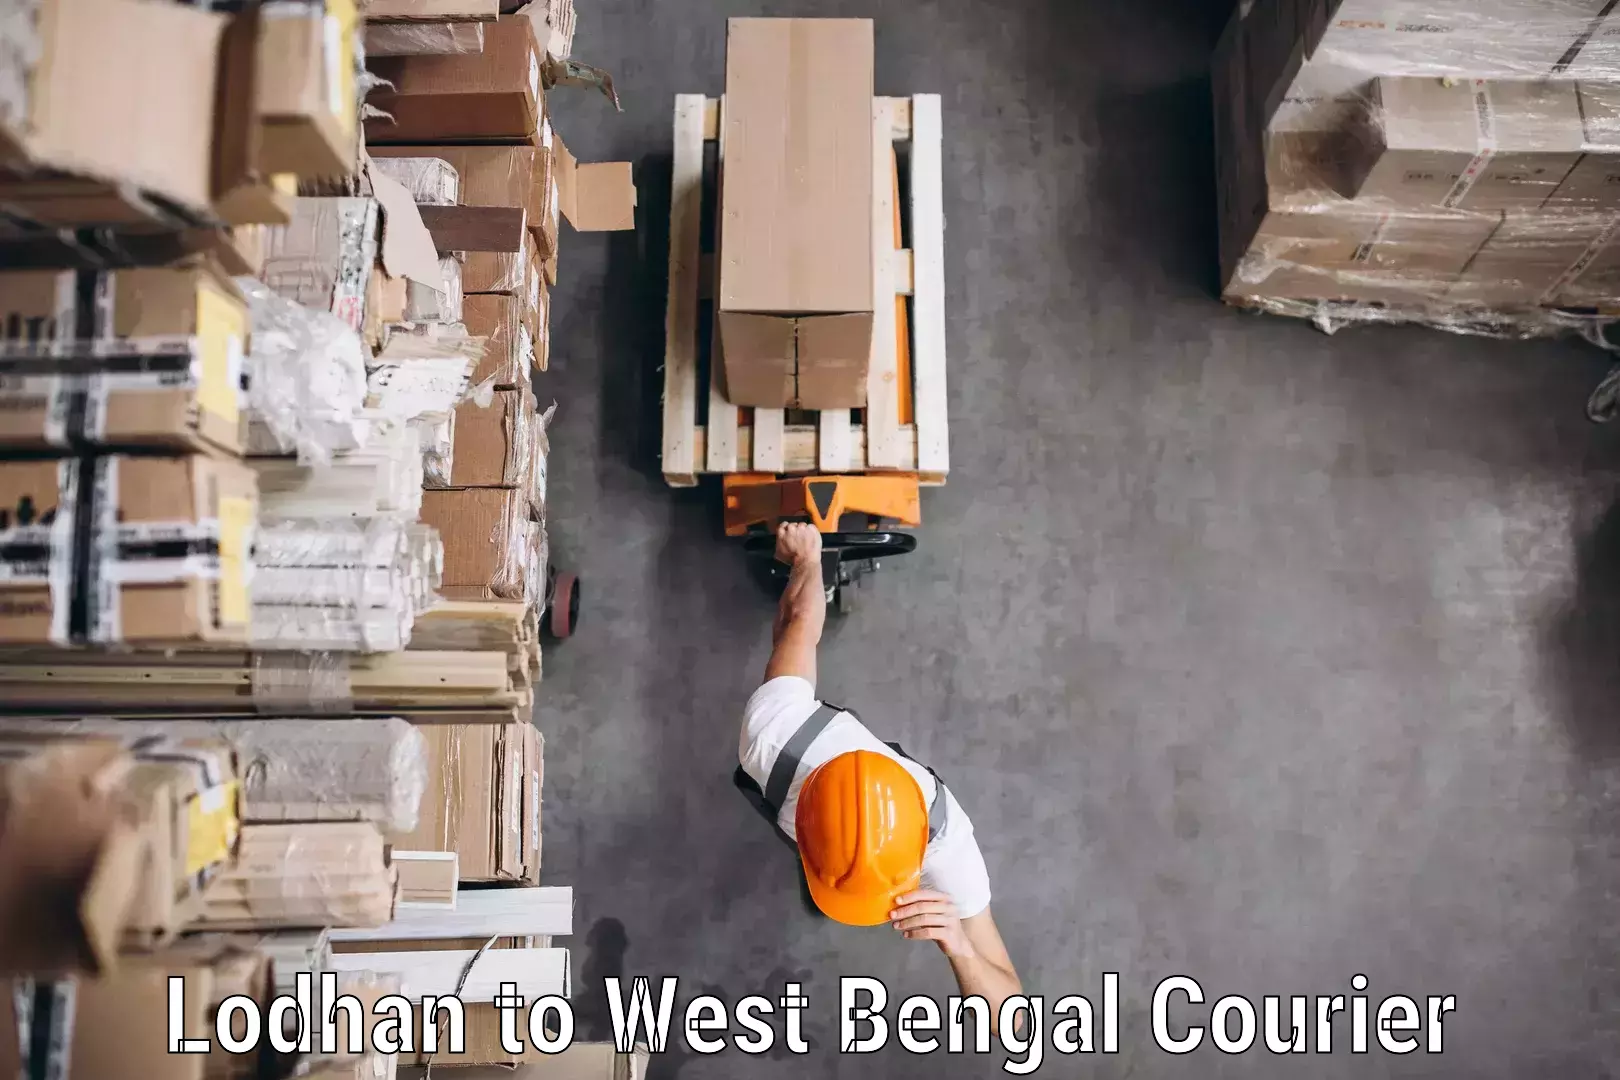 Nationwide parcel services Lodhan to West Bengal